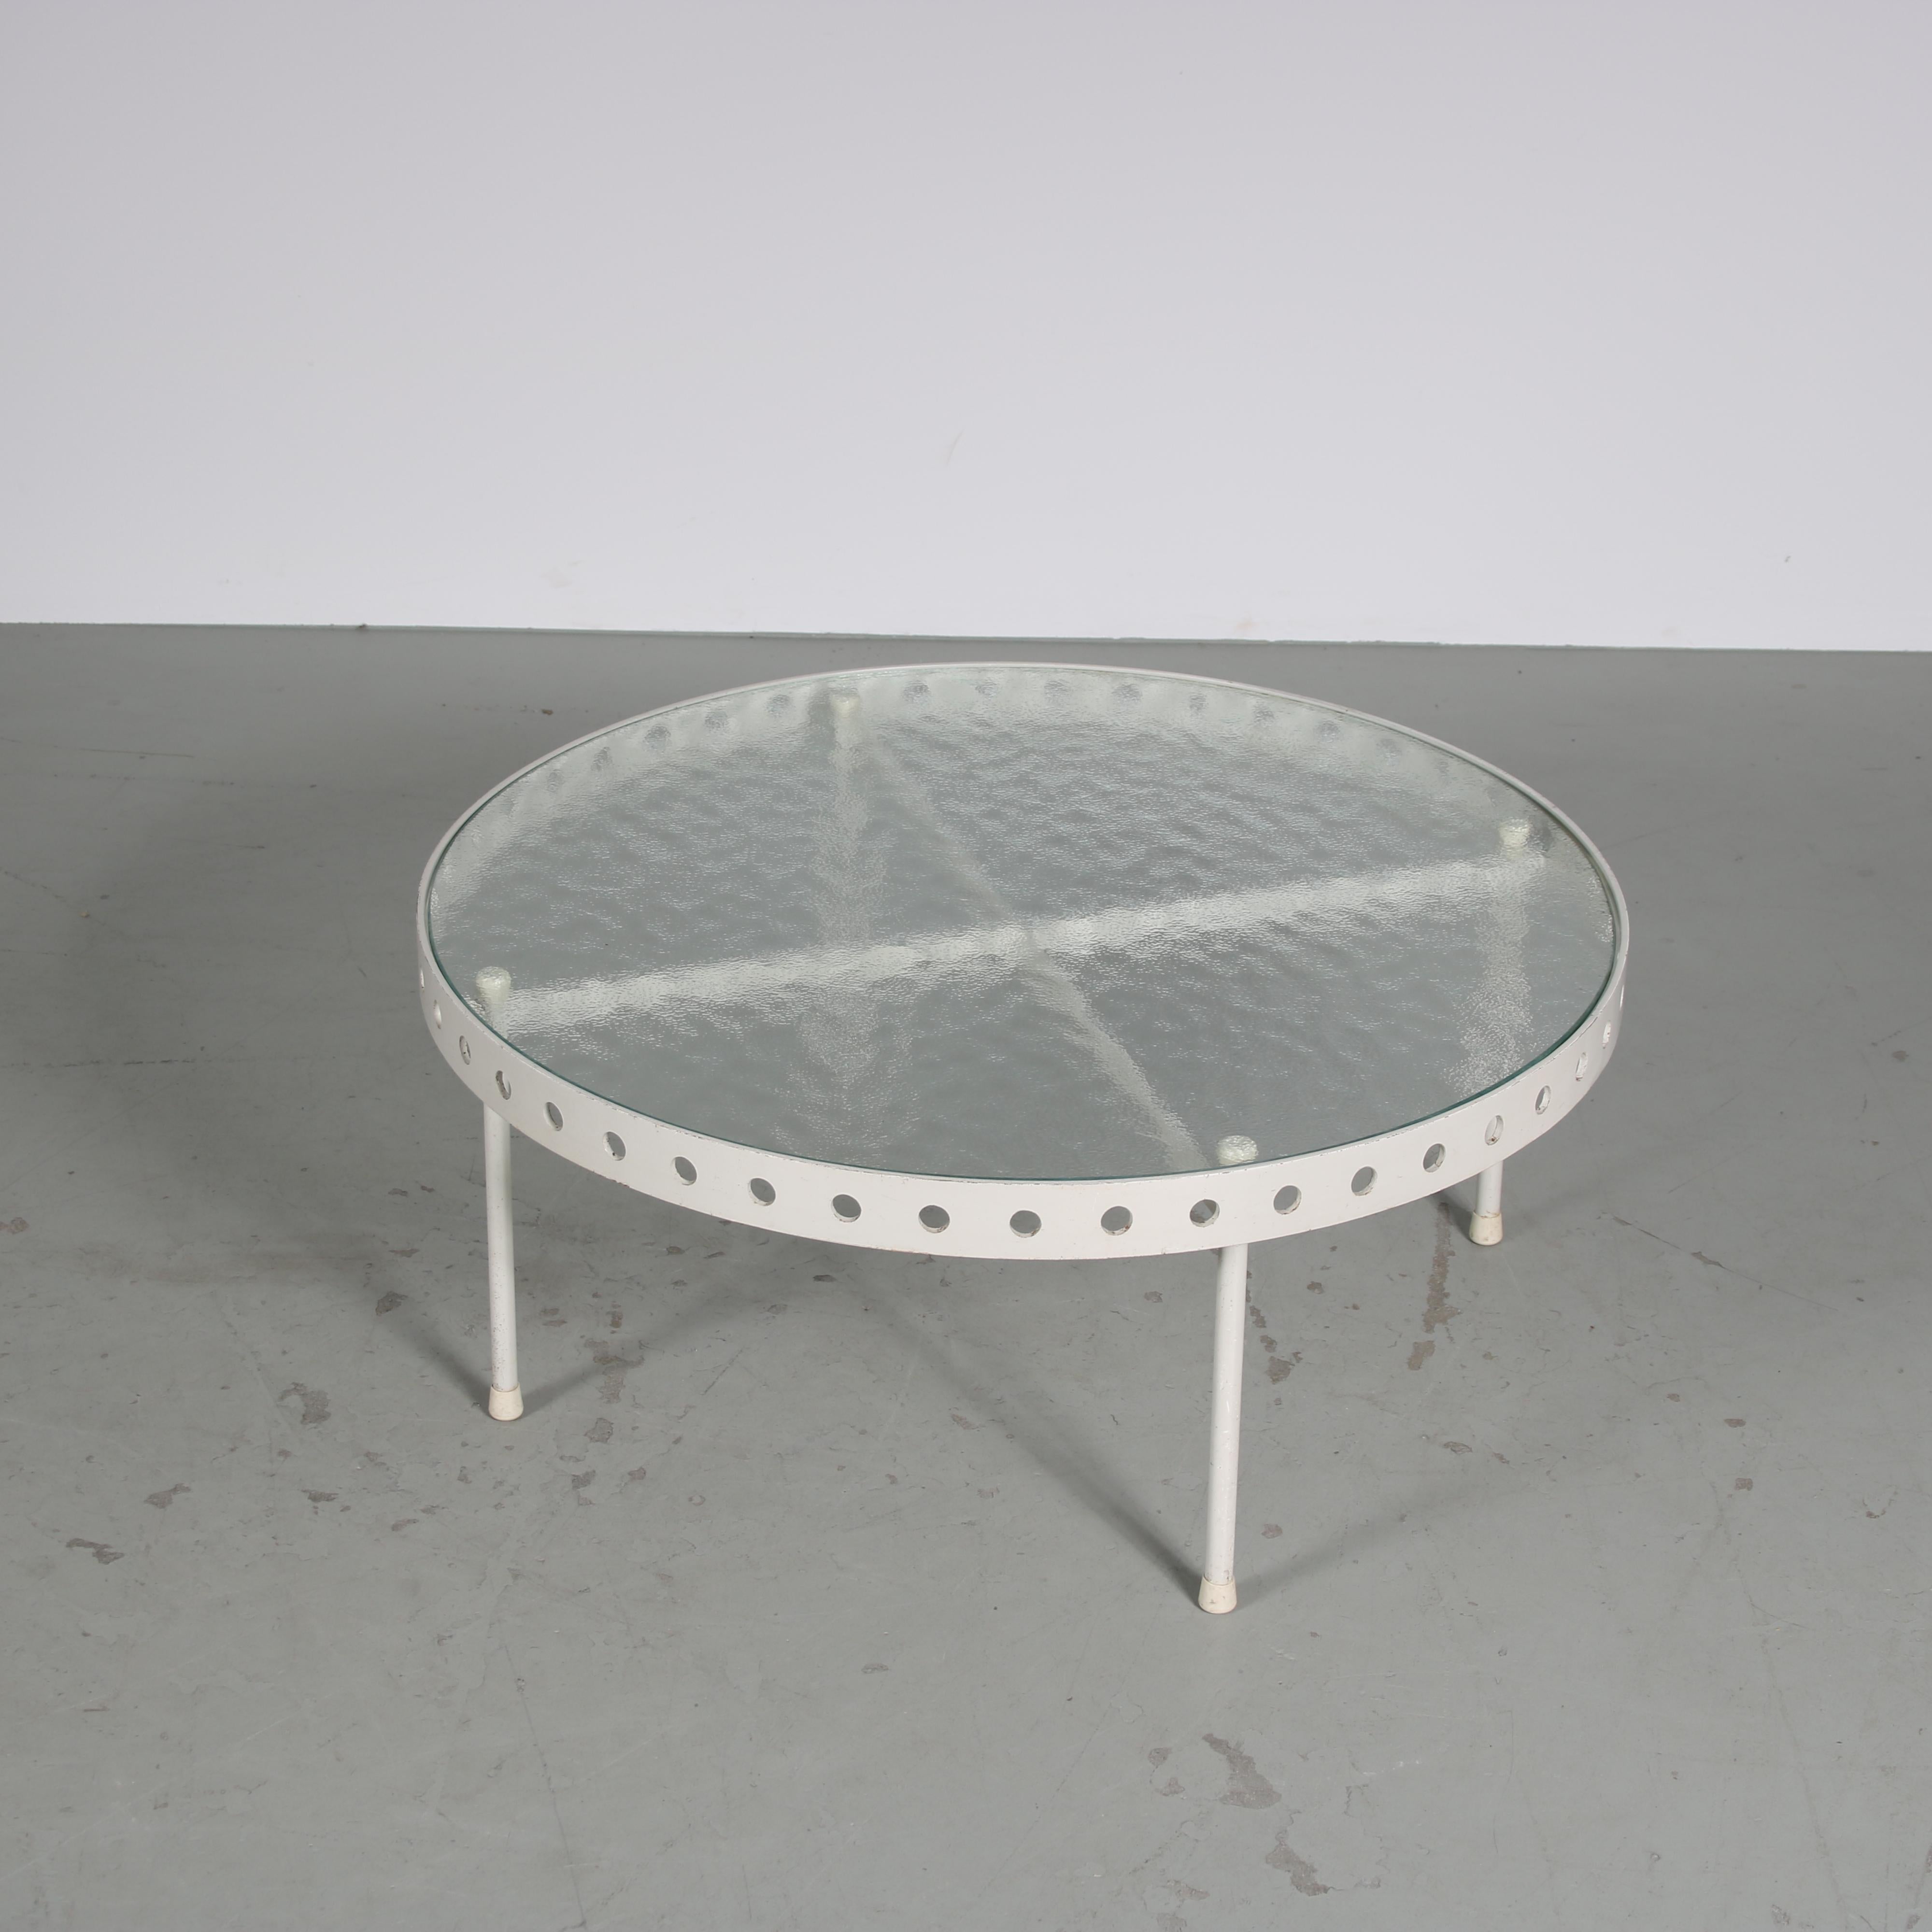 Dutch Janni van Pelt Coffee Table for MyHome, Netherlands 1950 For Sale